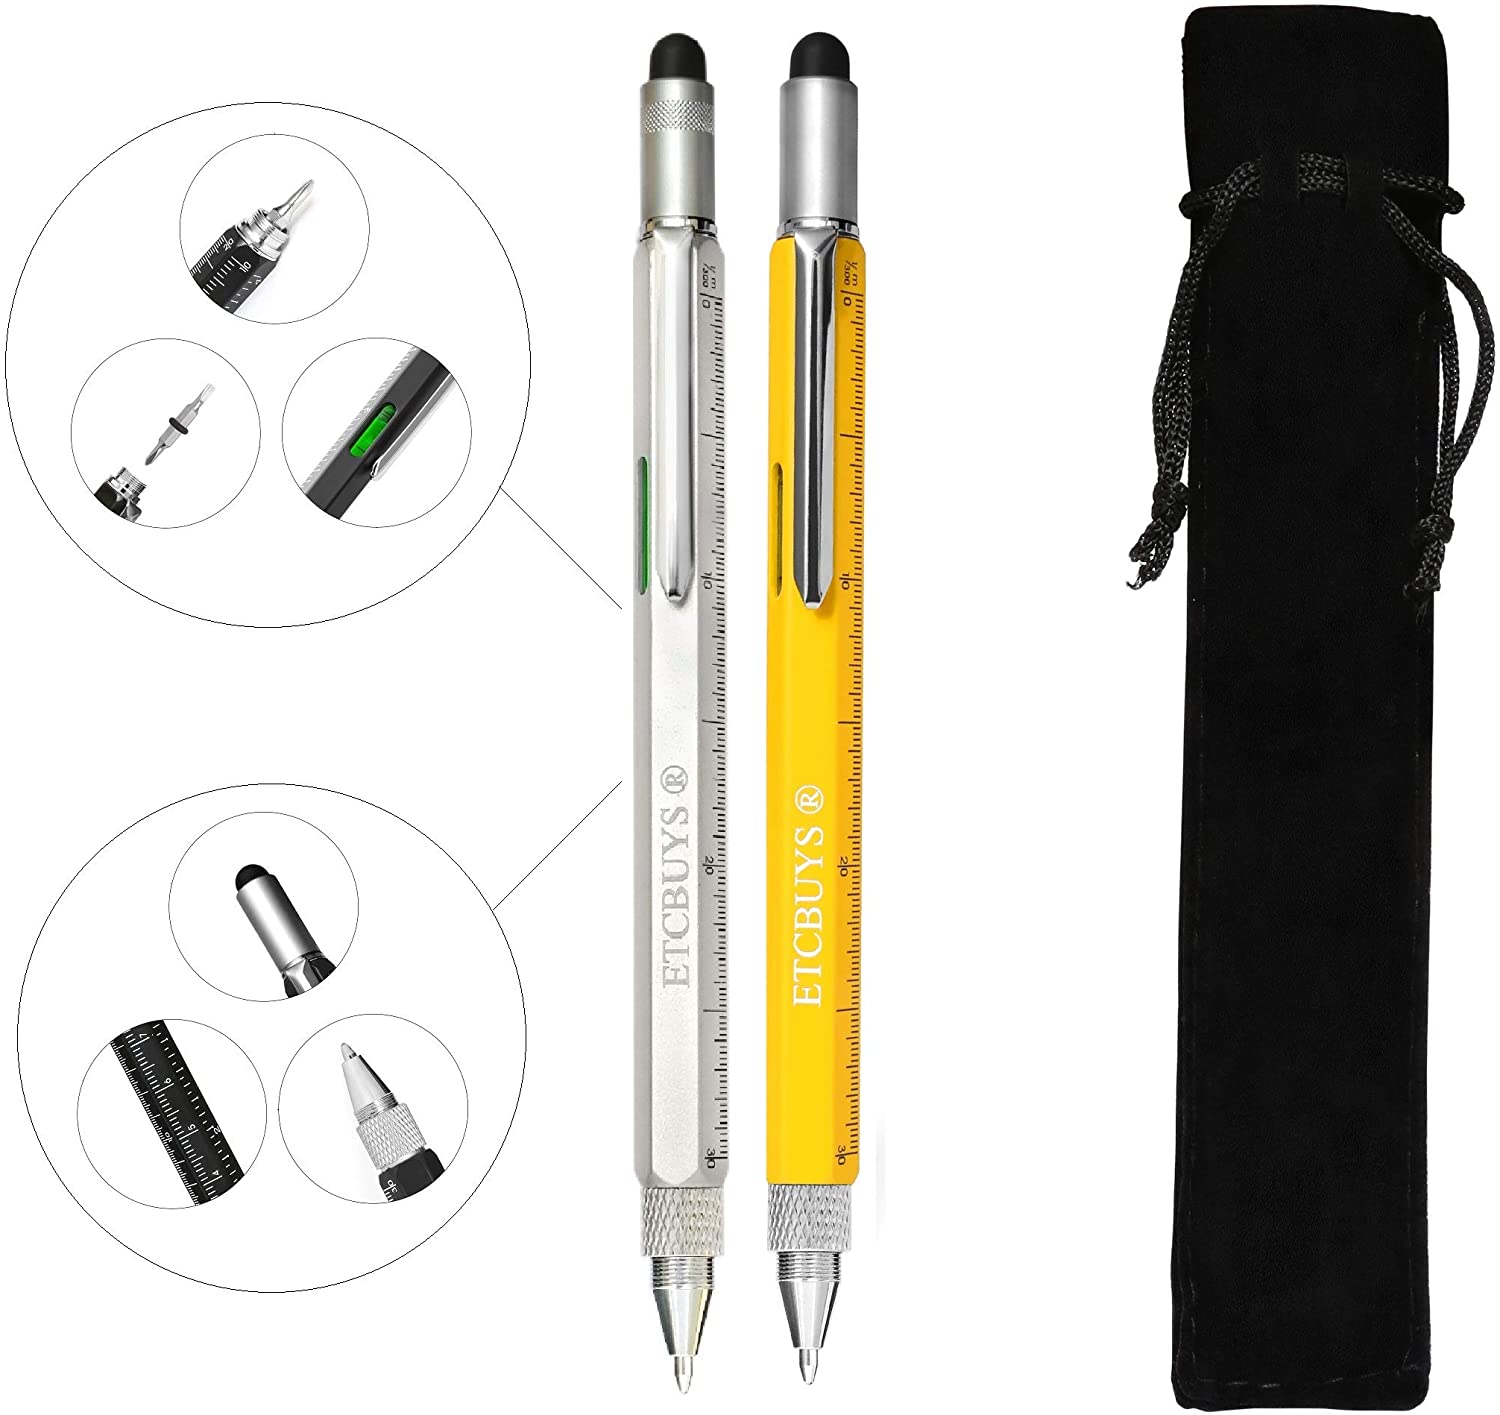 ETCBUYS Screwdriver Pen Pocket Multi Tool 6 in 1 - (1 Yellow 1 Silver) 2 Pack